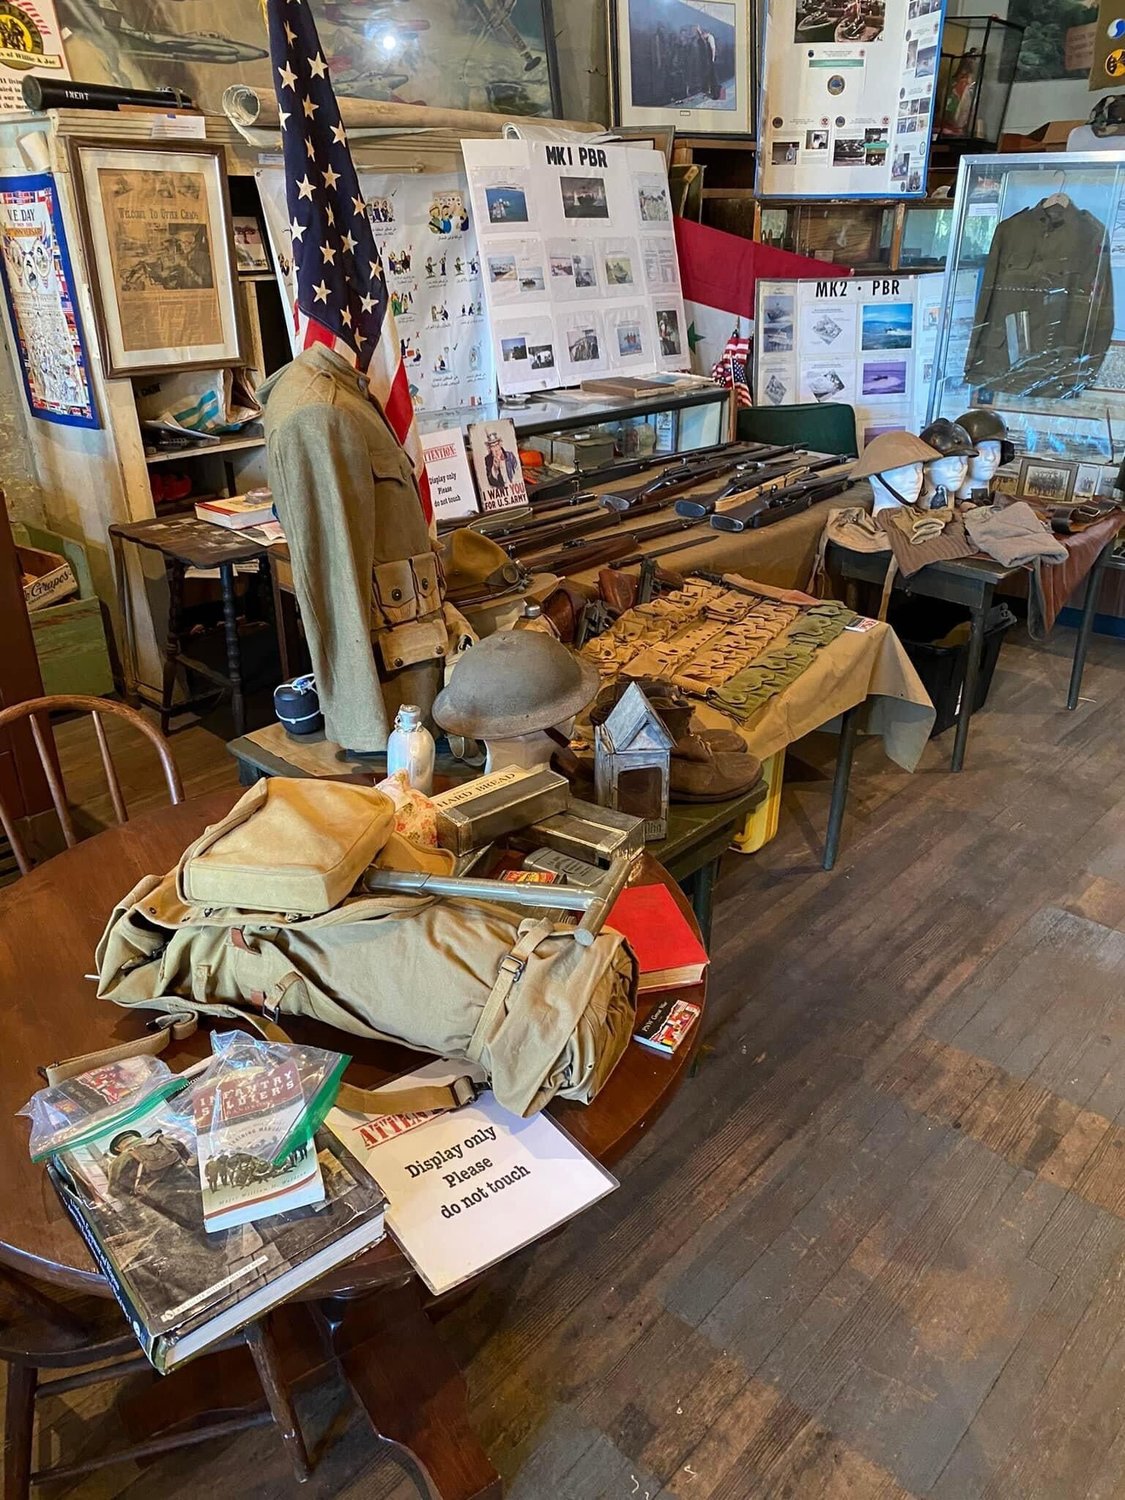 America’s Team Military Museum, located at 622 N. Tower Ave. in Centralia, put vehicles and other military items on display Friday and Saturday in honor of Veterans Day.